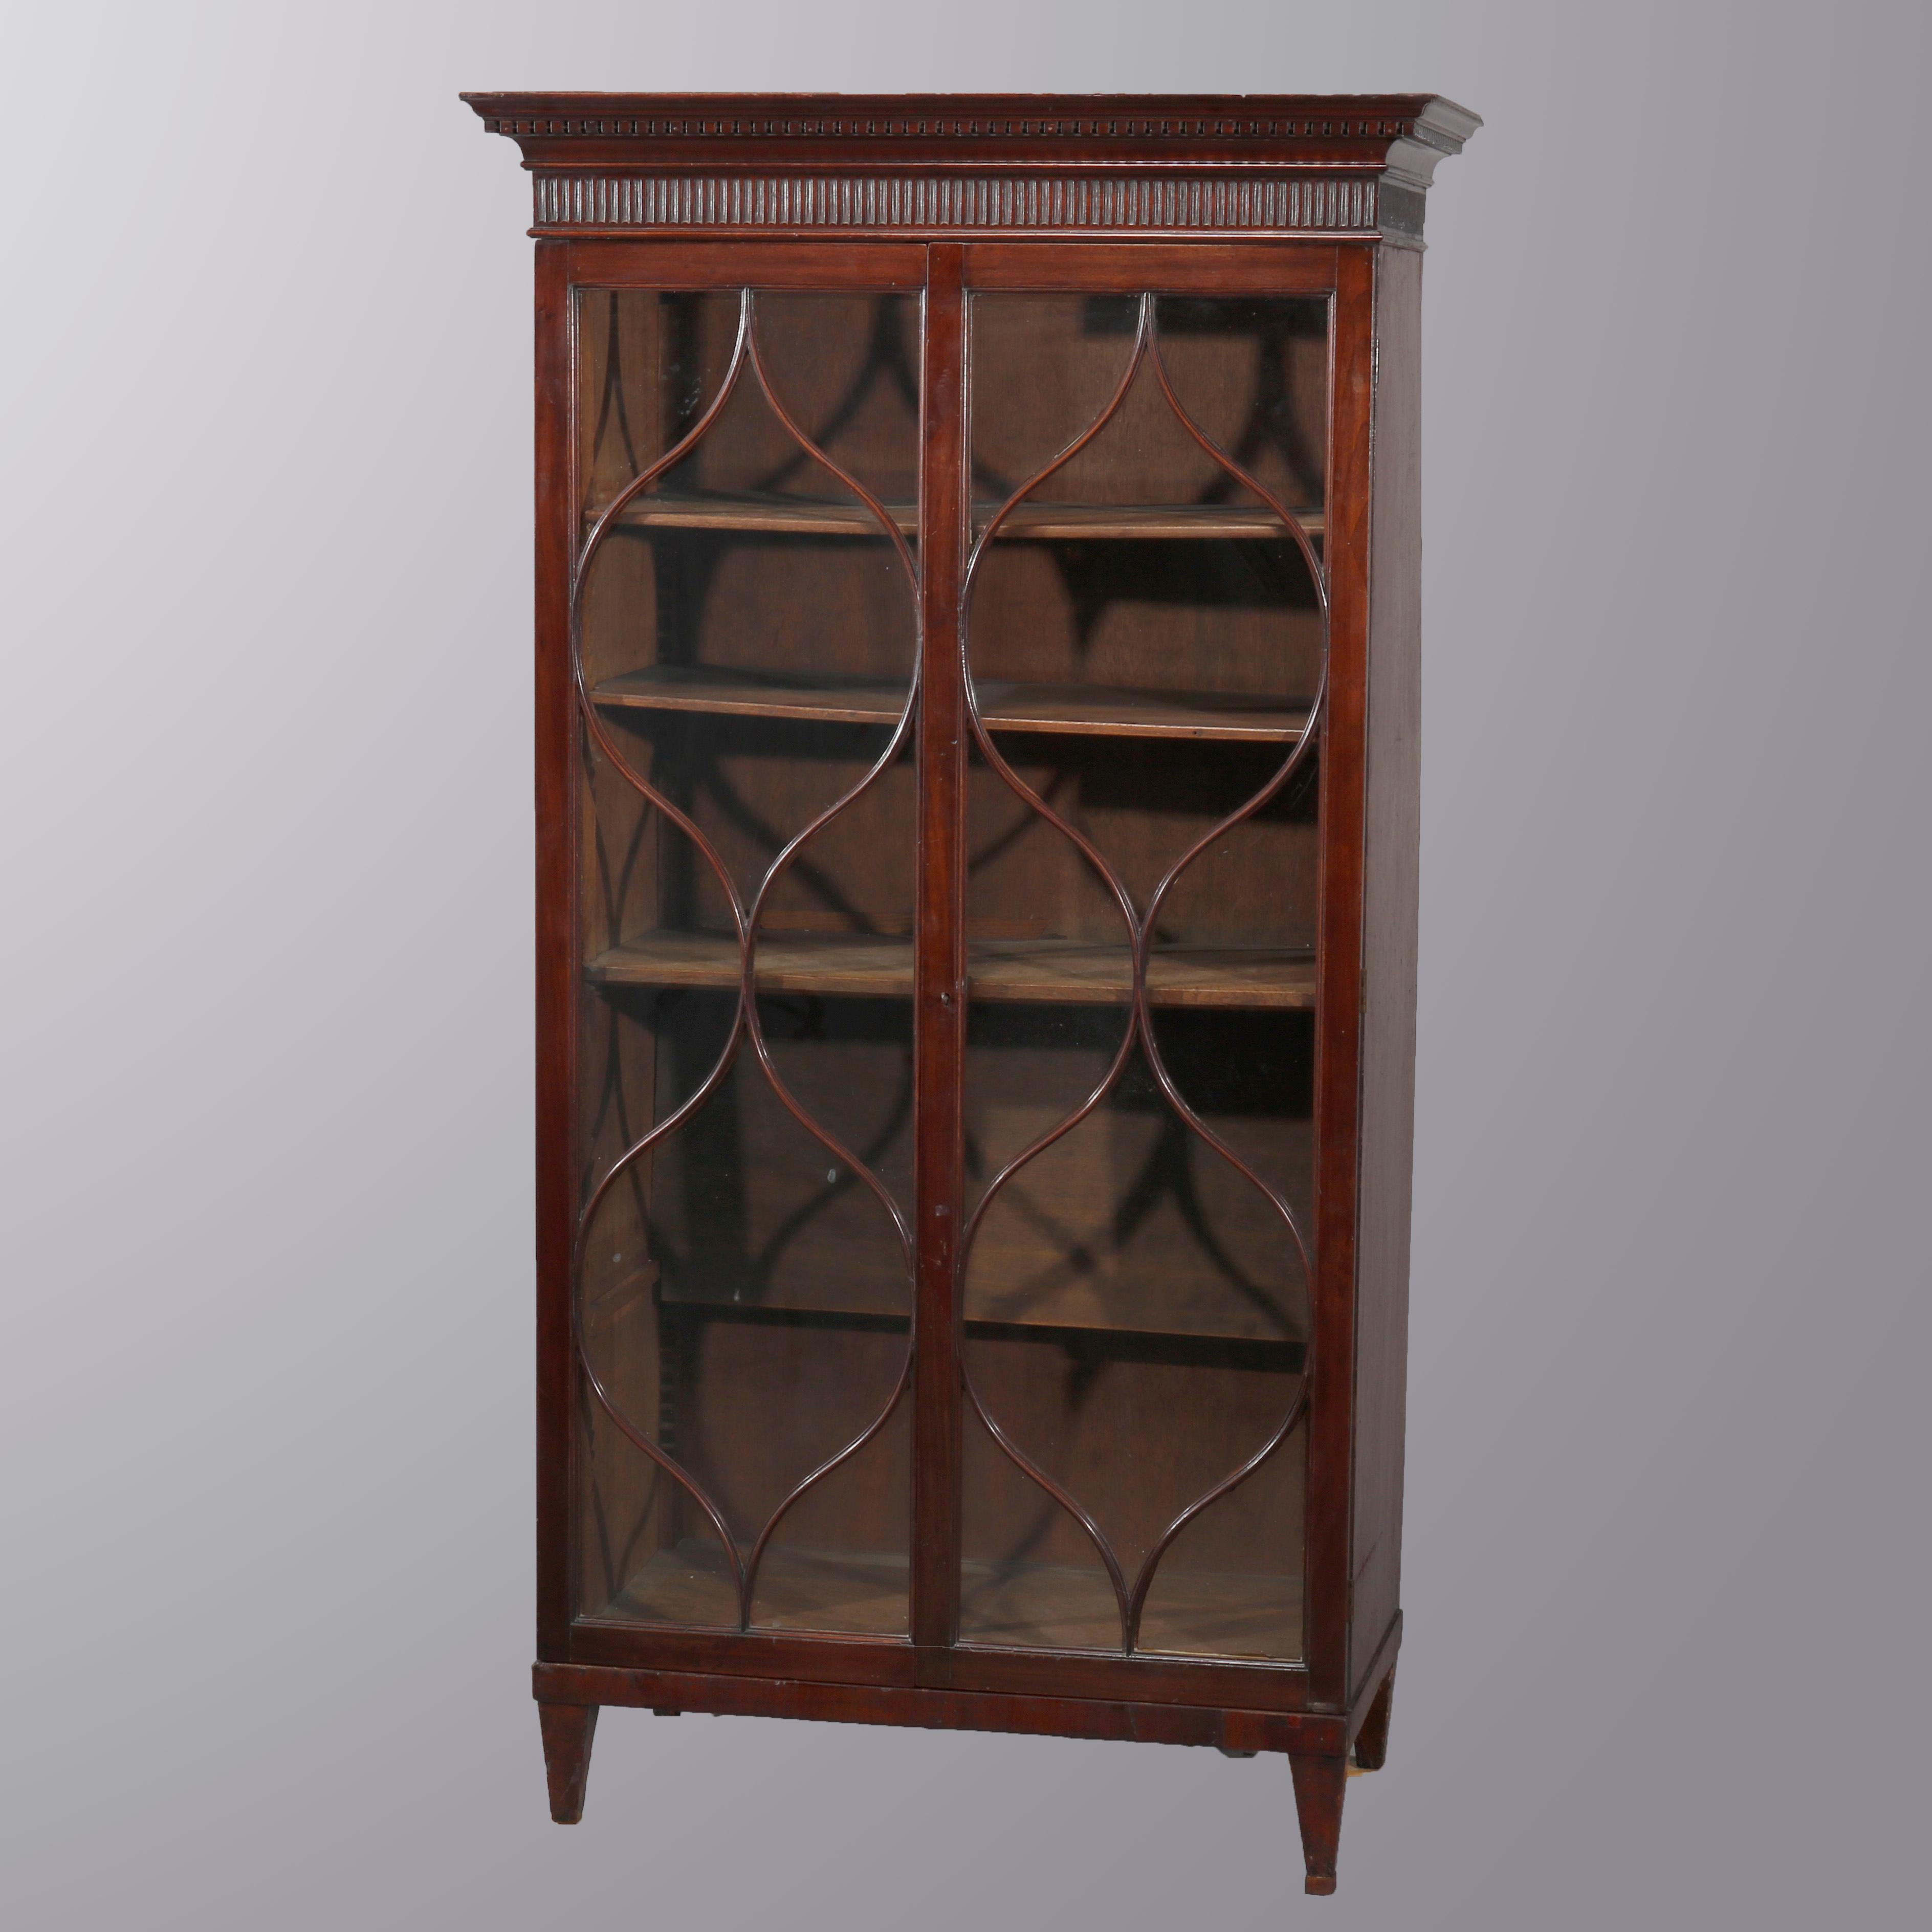 An antique English Georgian bookcase offers mahogany construction with case having reeded frieze over double serpentined mullioned glass doors opening to shelved interior, circa 1810

Measures: 61.5